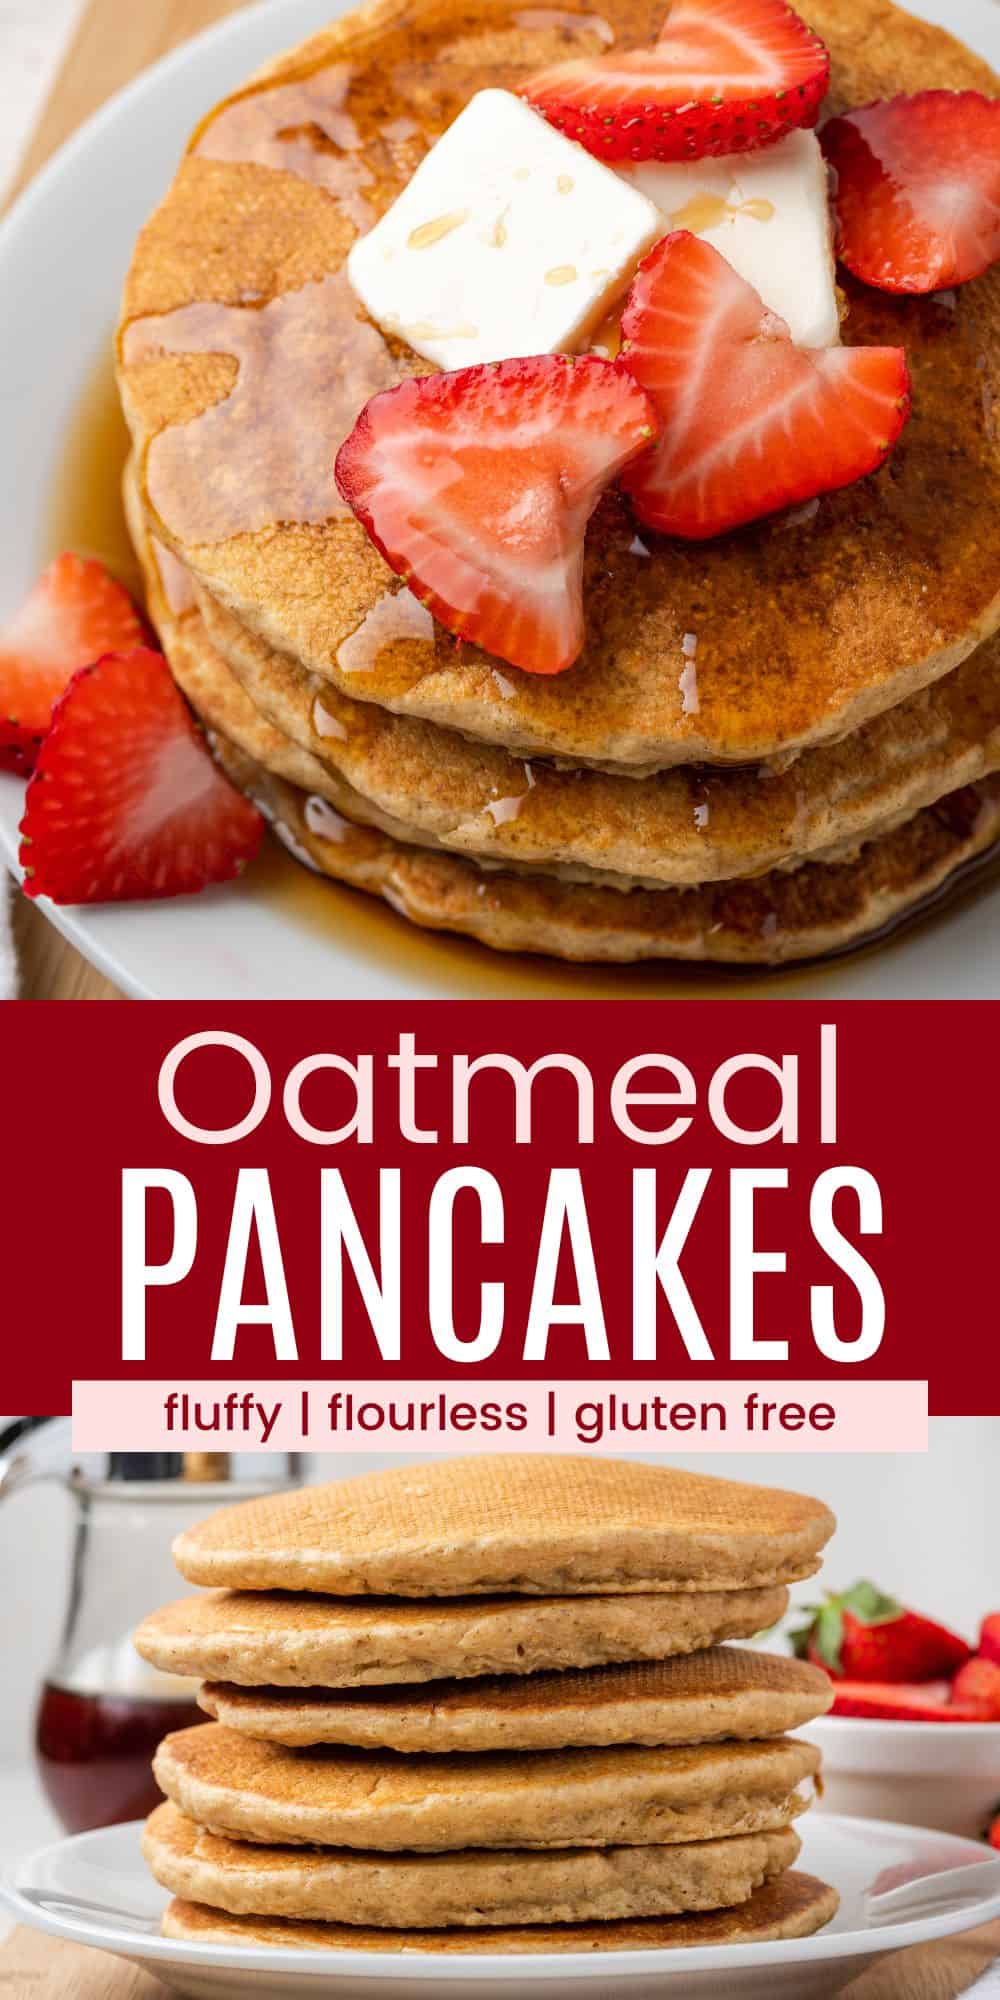 Oatmeal Pancakes | Cupcakes and Kale Chips